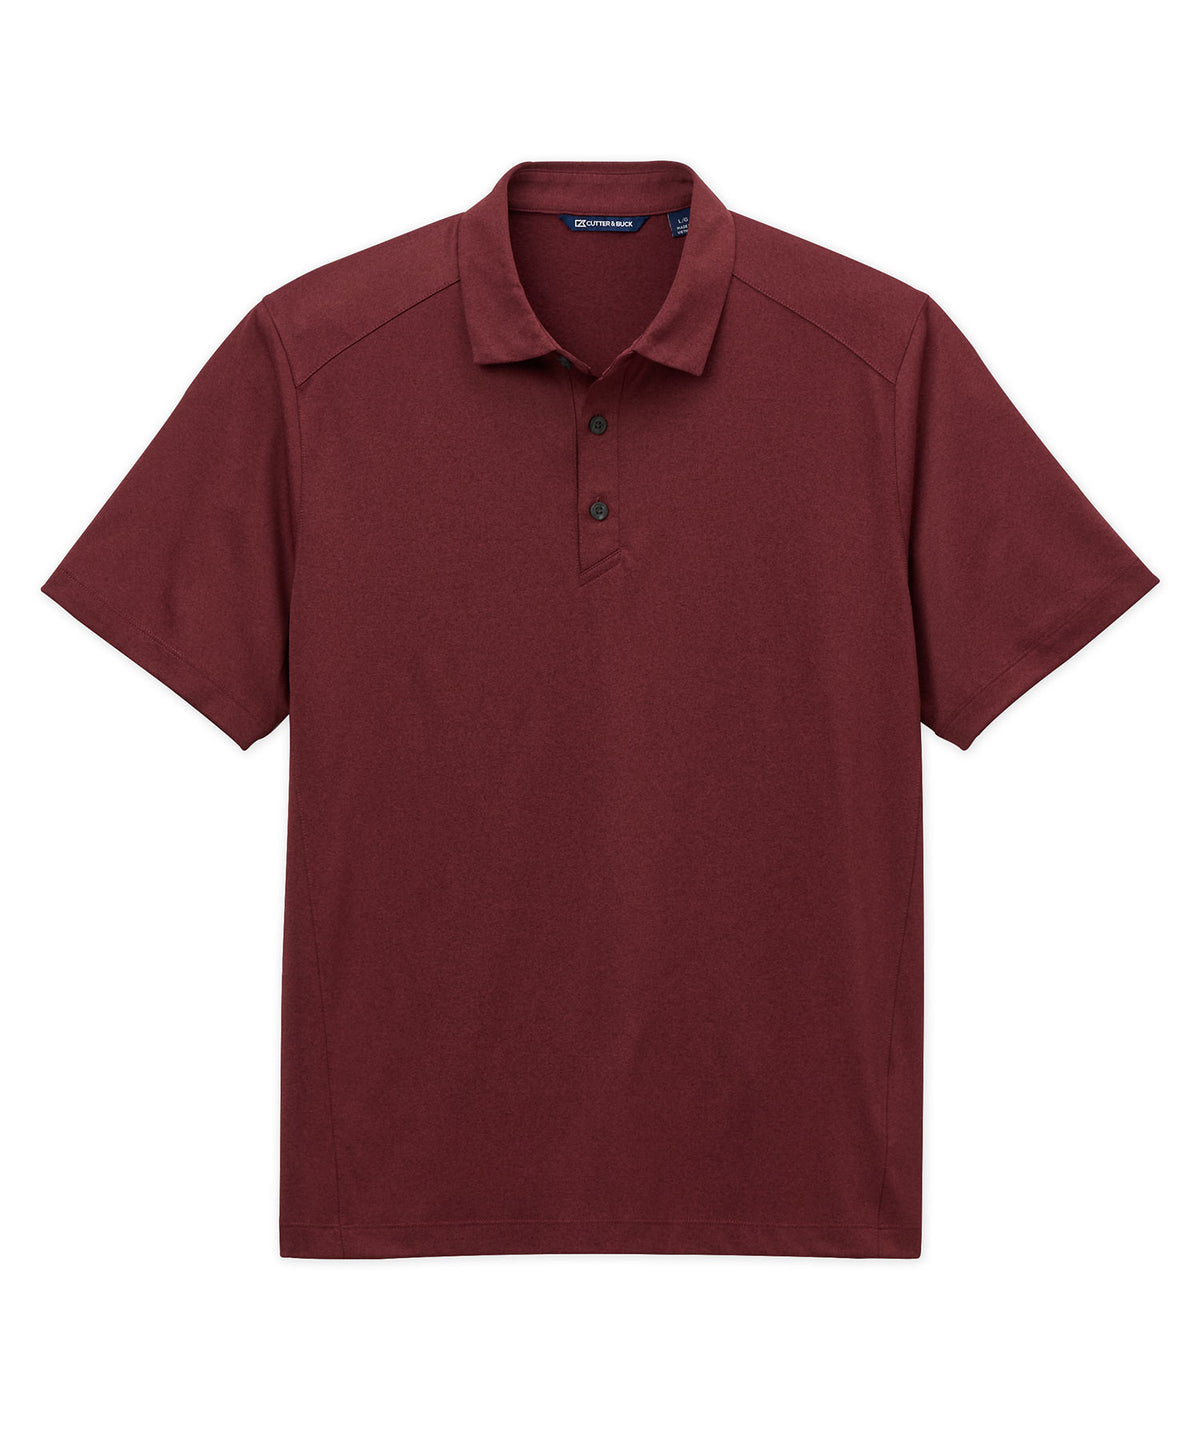 Cutter & Buck Forge Eco Stretch Recycled Polo, Big & Tall